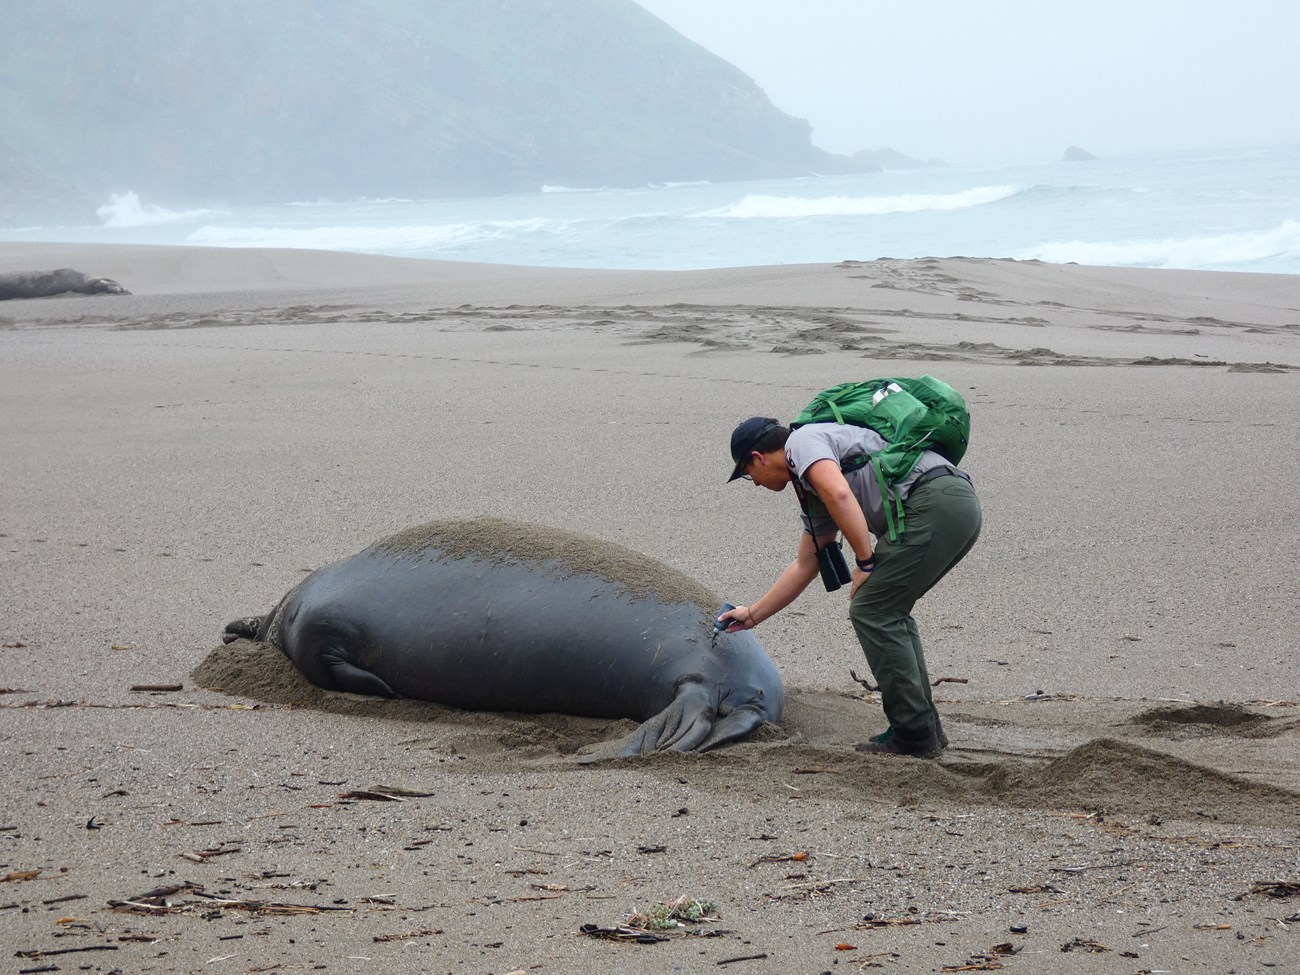 Matt writing a letter-number combination on the rump of a huge seal with a squeeze bottle of hair dye.